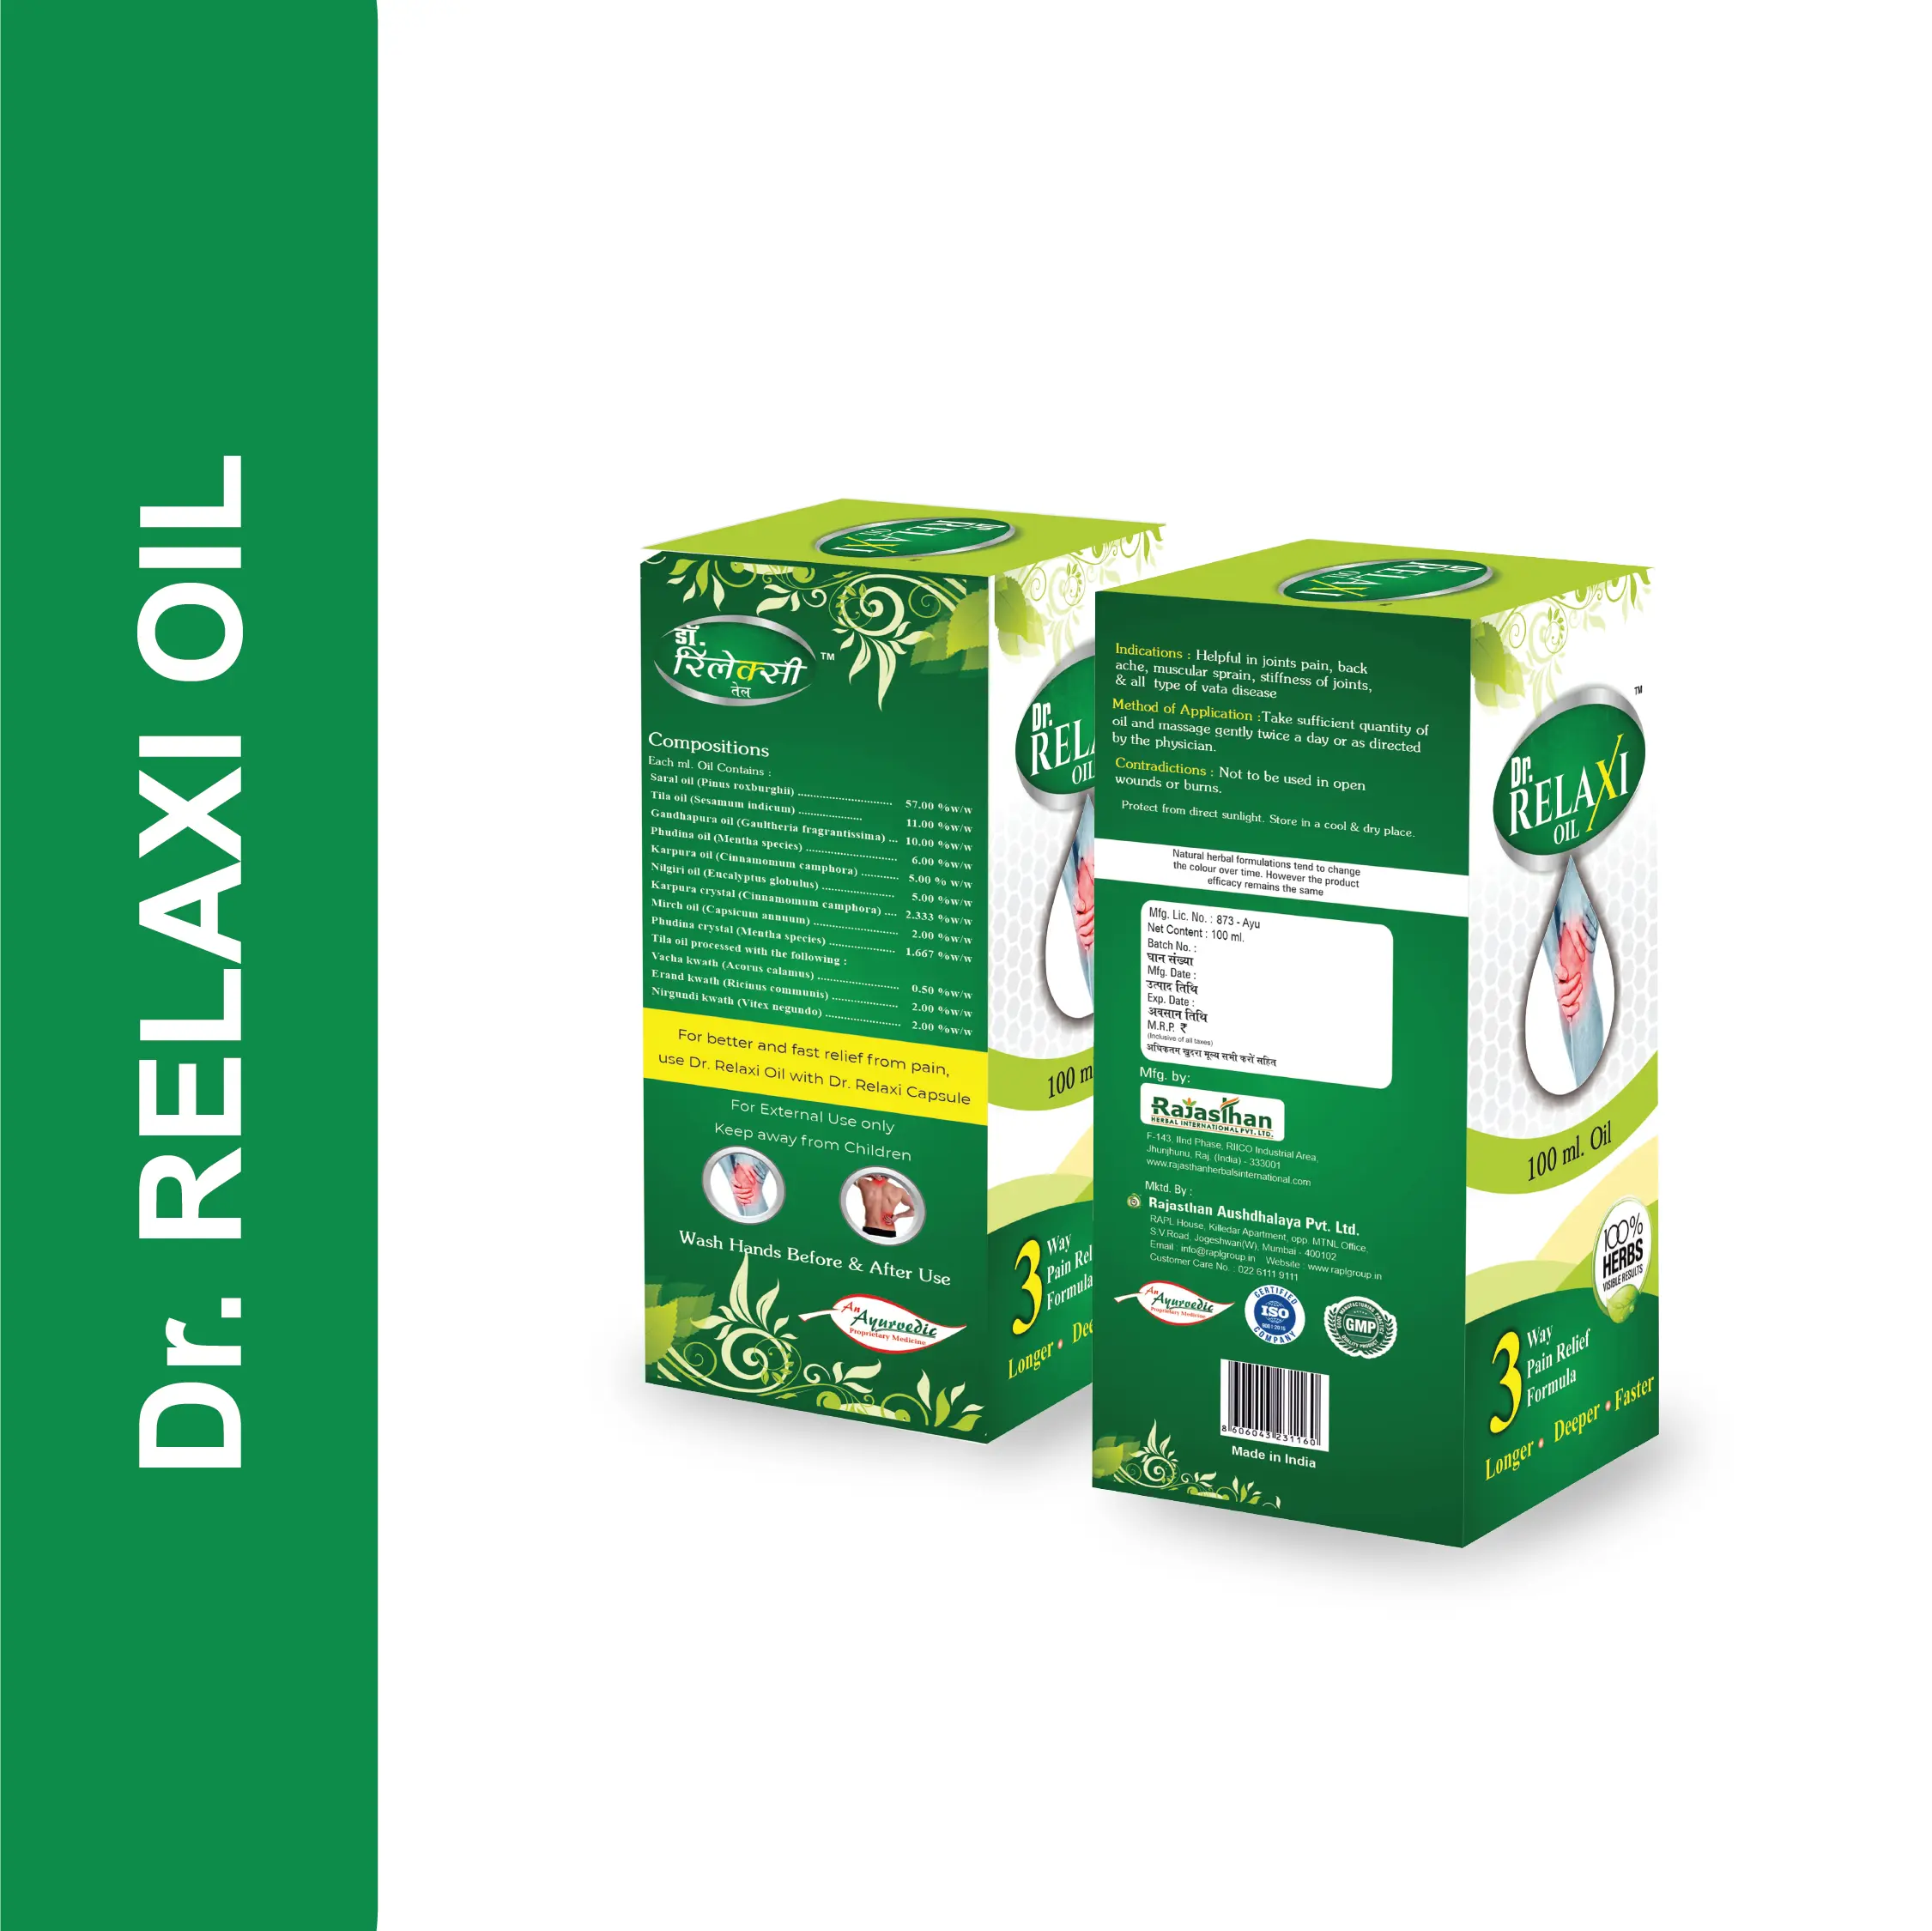 Dr Relax Oil